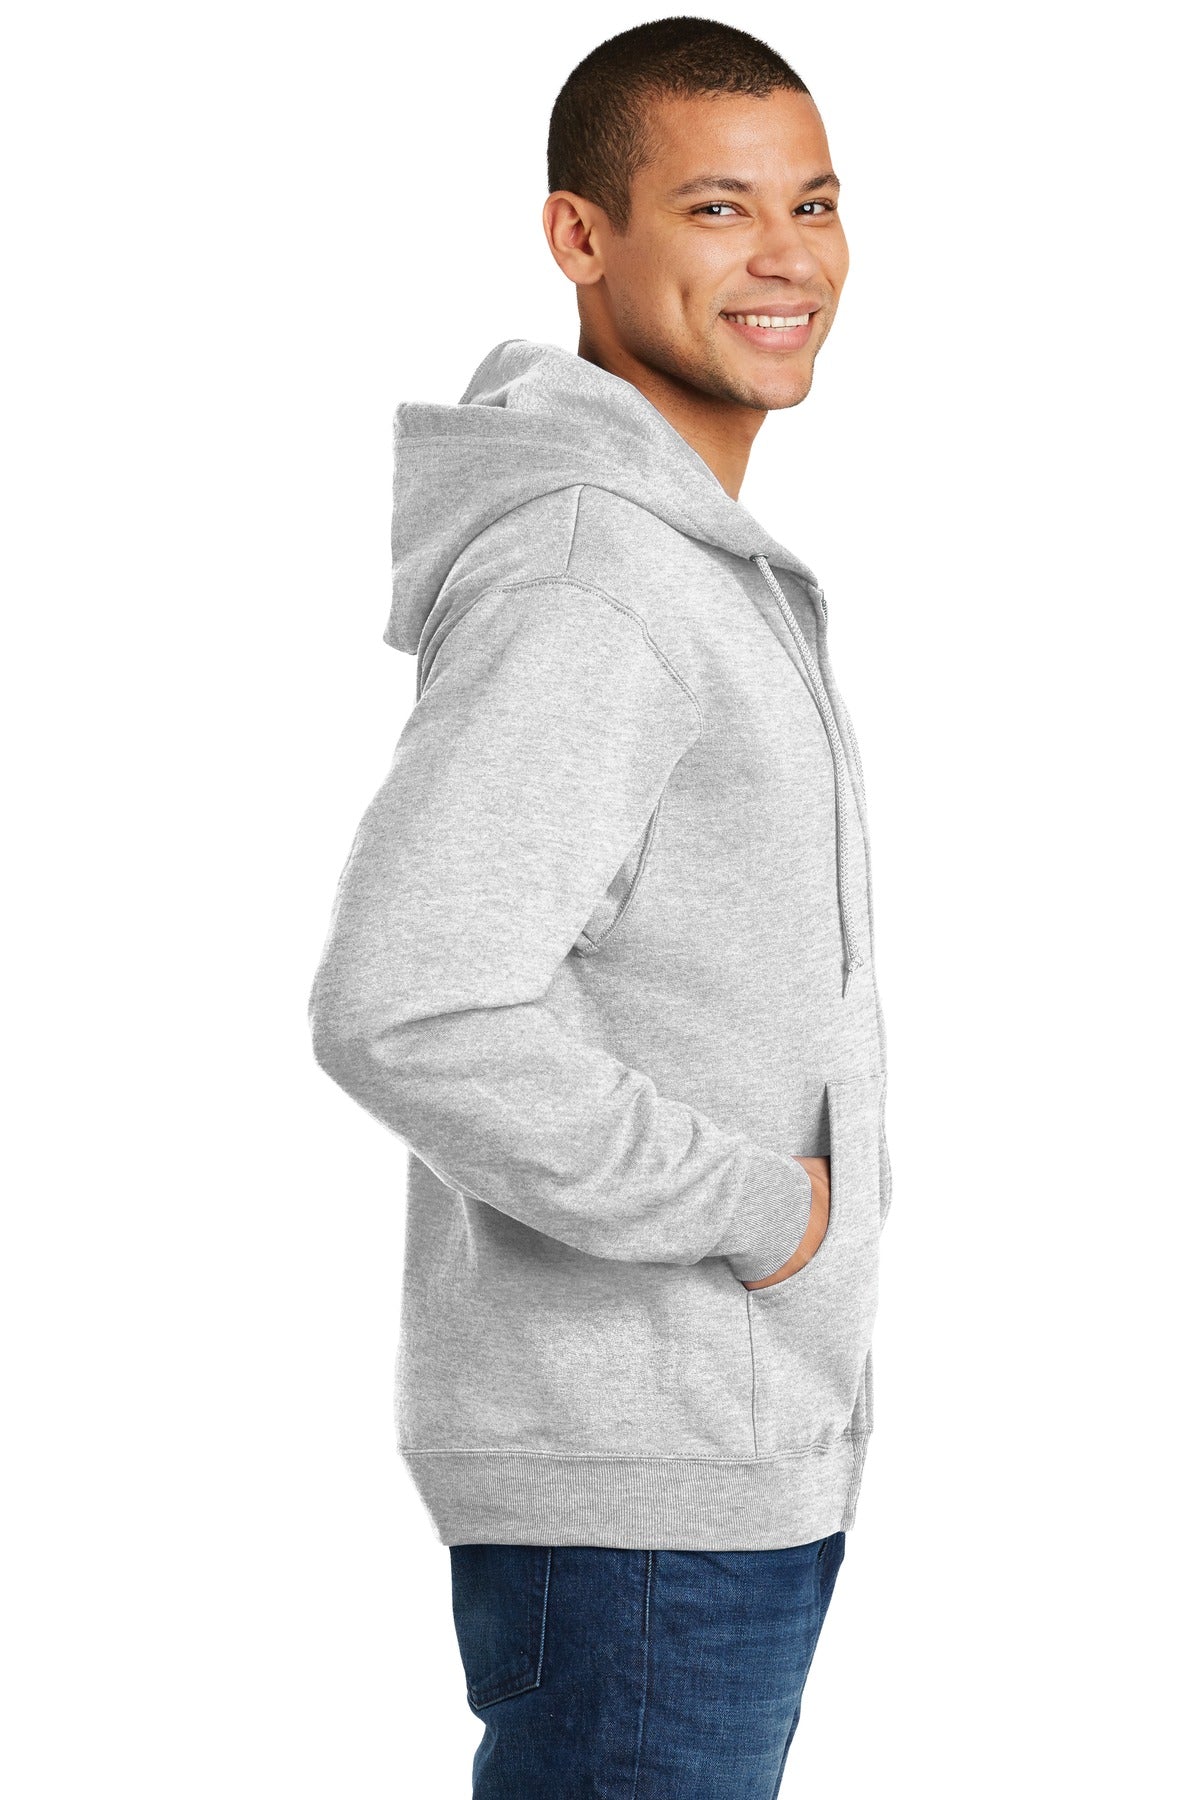 Full-Zip Hoodie with Embroidery  993M